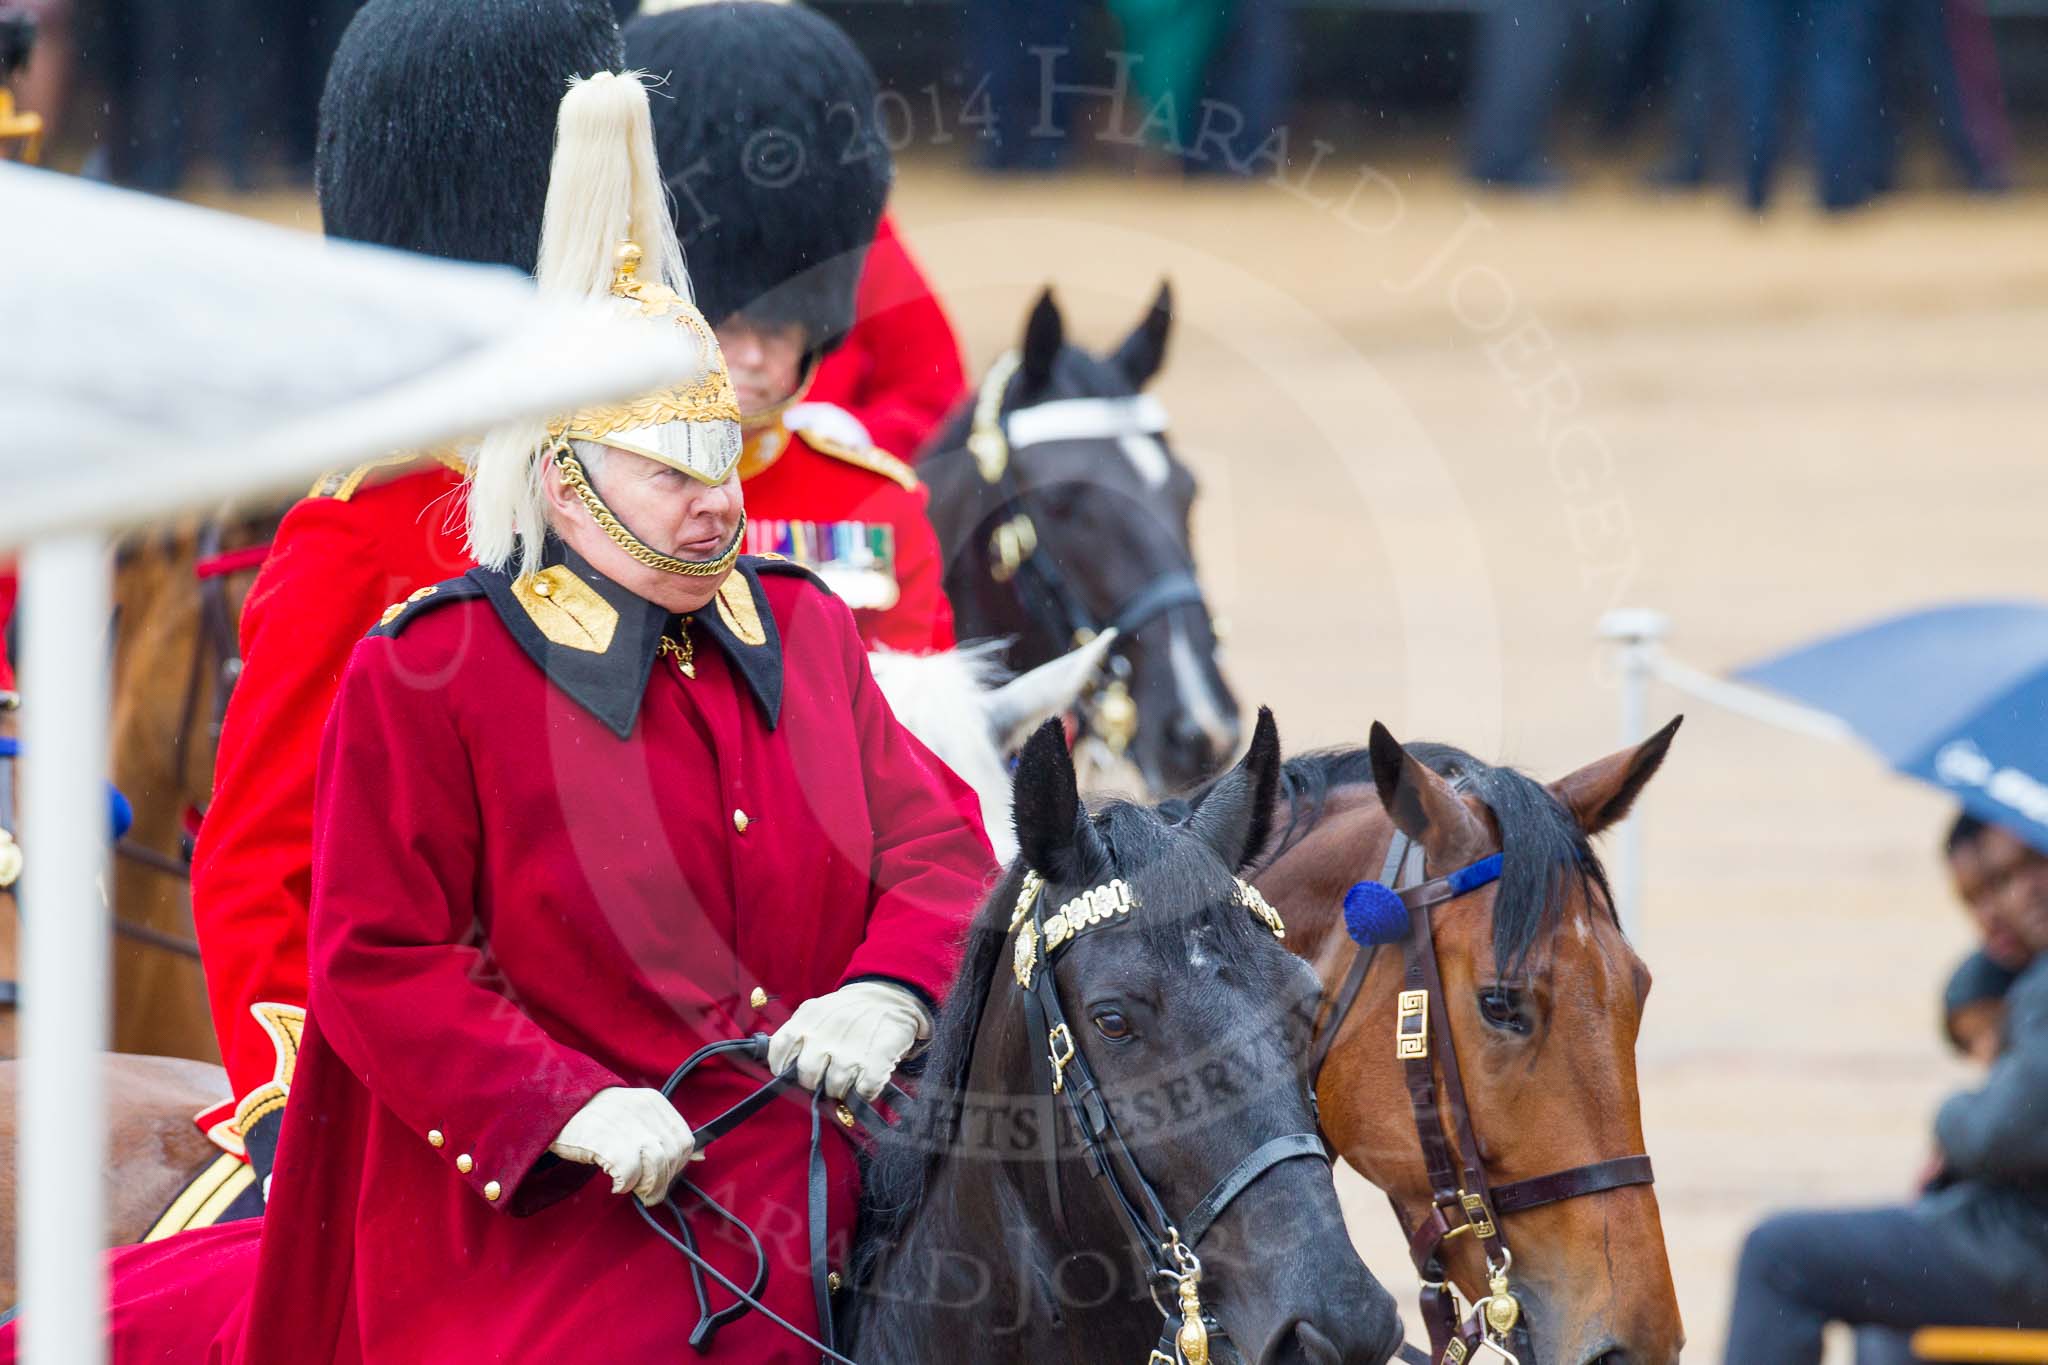 The Colonel's Review 2014.
Horse Guards Parade, Westminster,
London,

United Kingdom,
on 07 June 2014 at 11:01, image #279